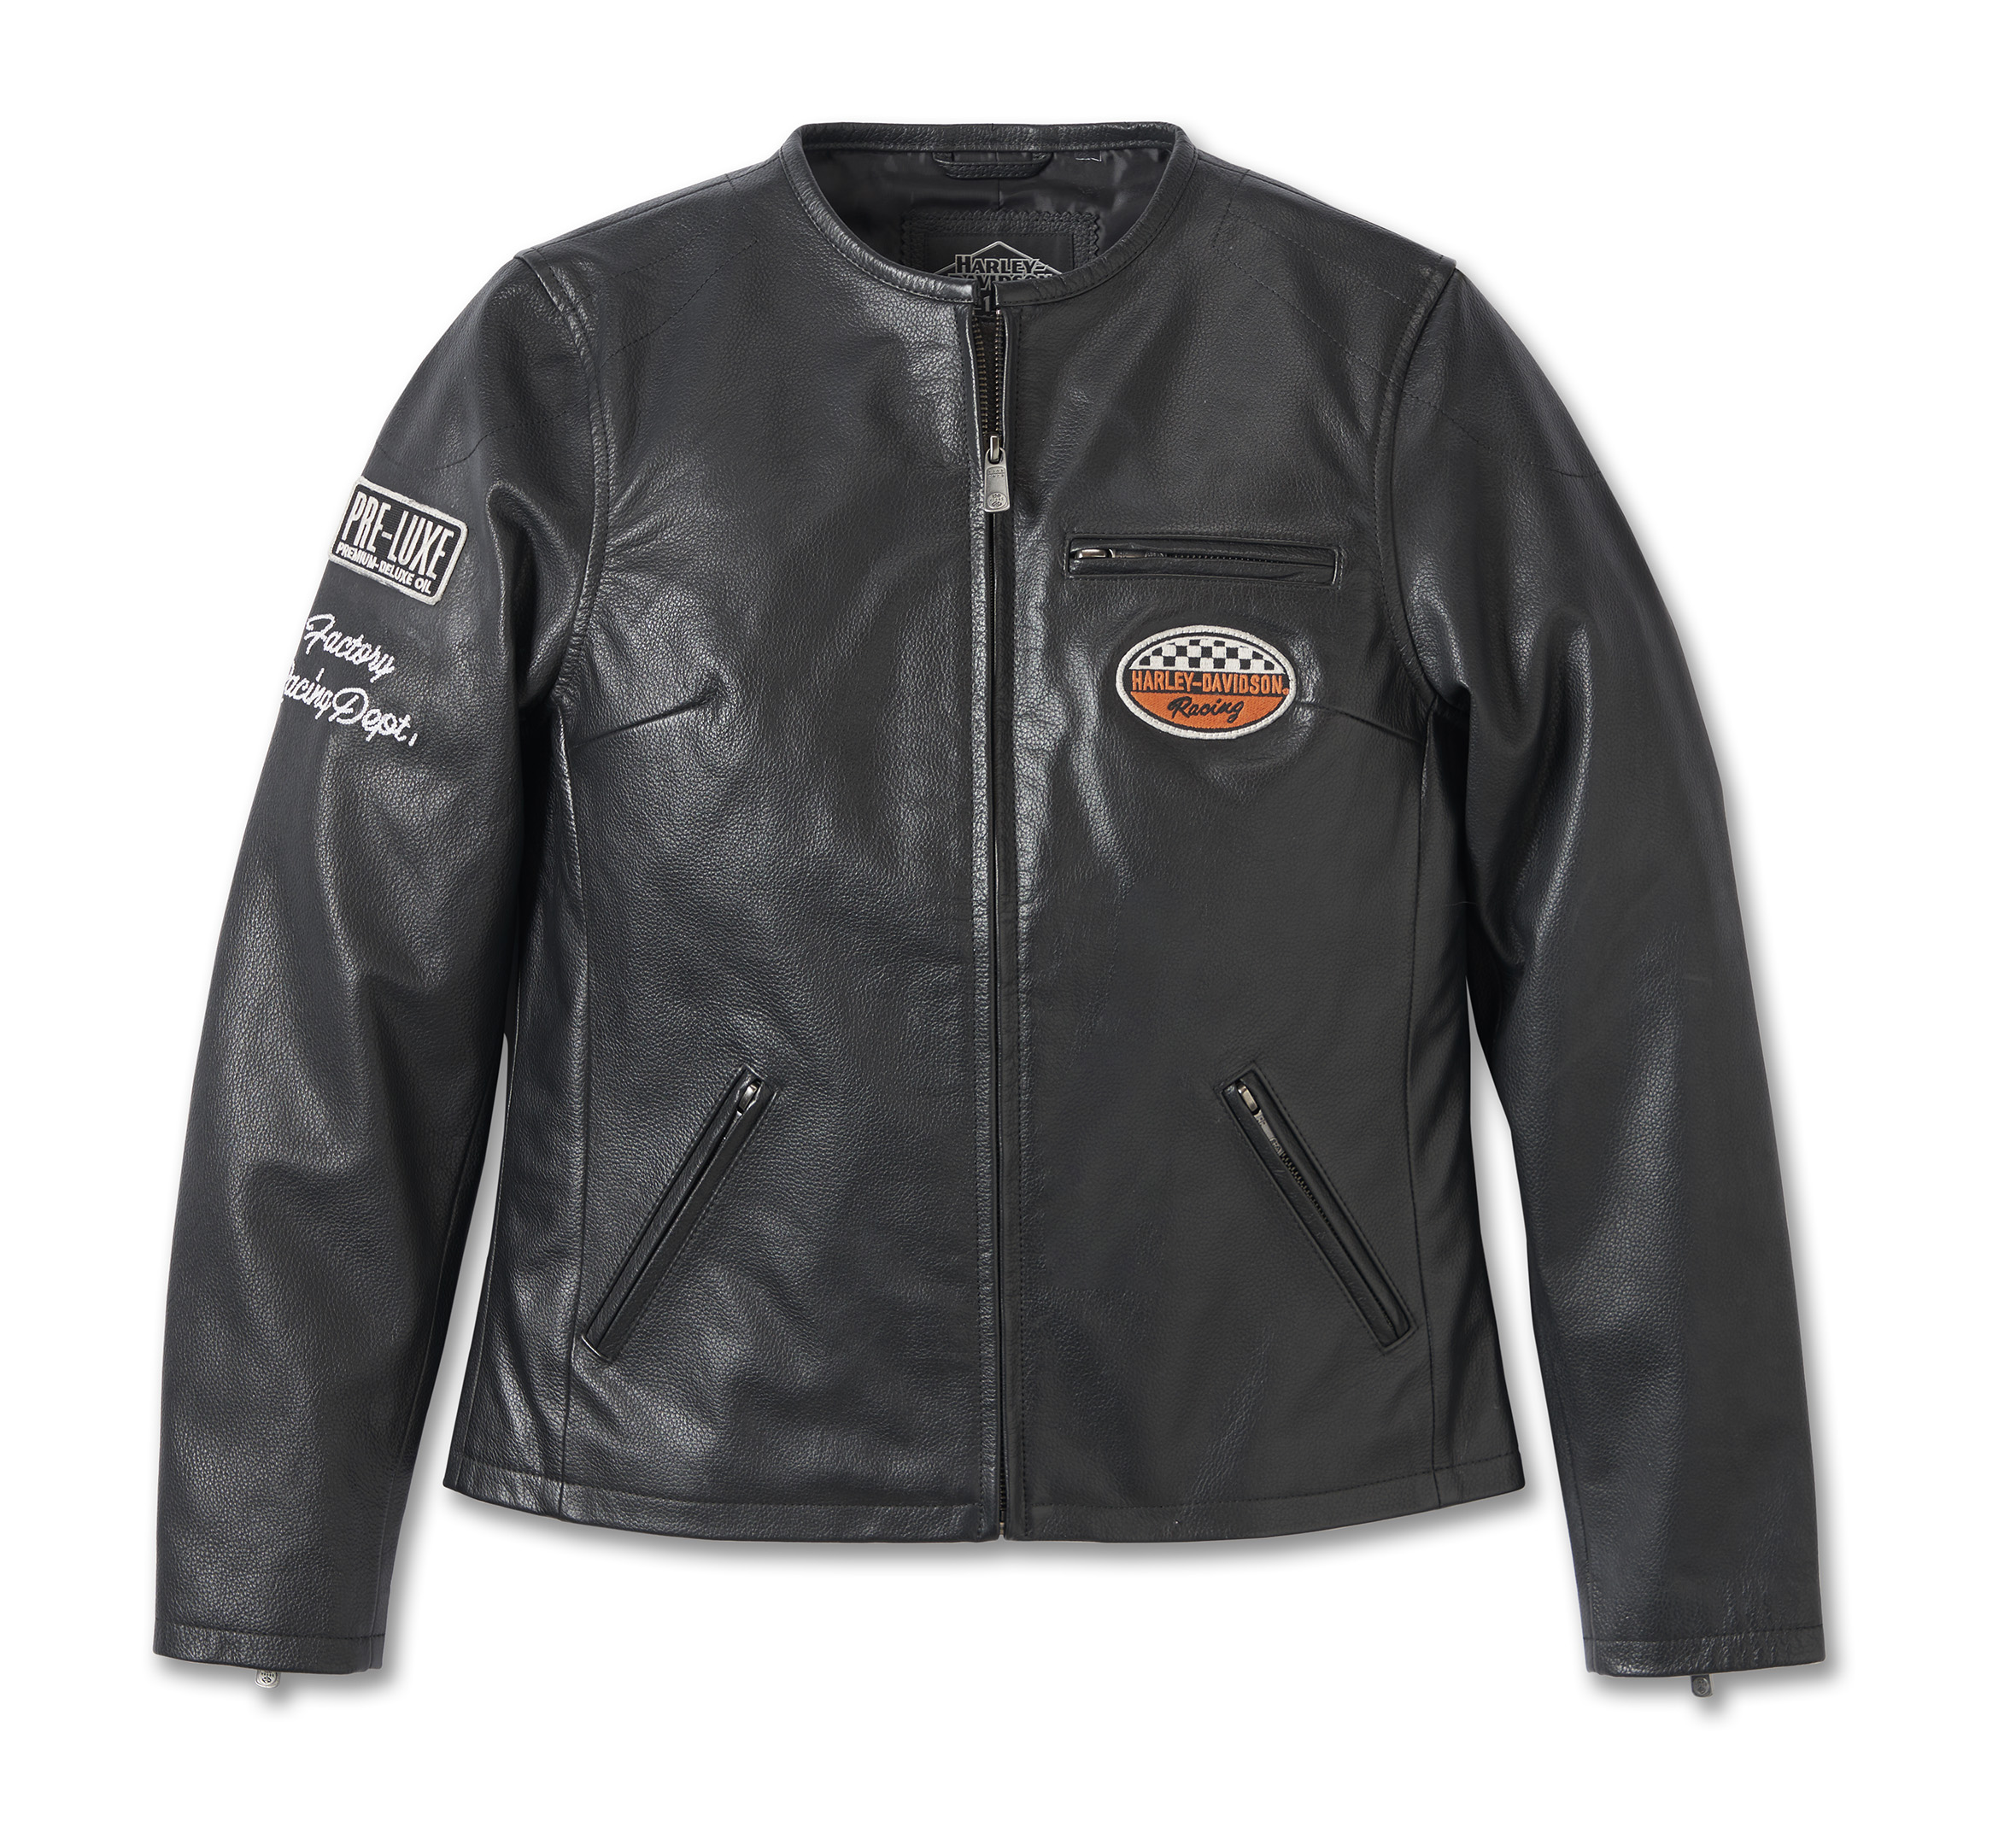 Shop Now: Women's White Leather Motorcycle Cafe Racer Jacket In Europe